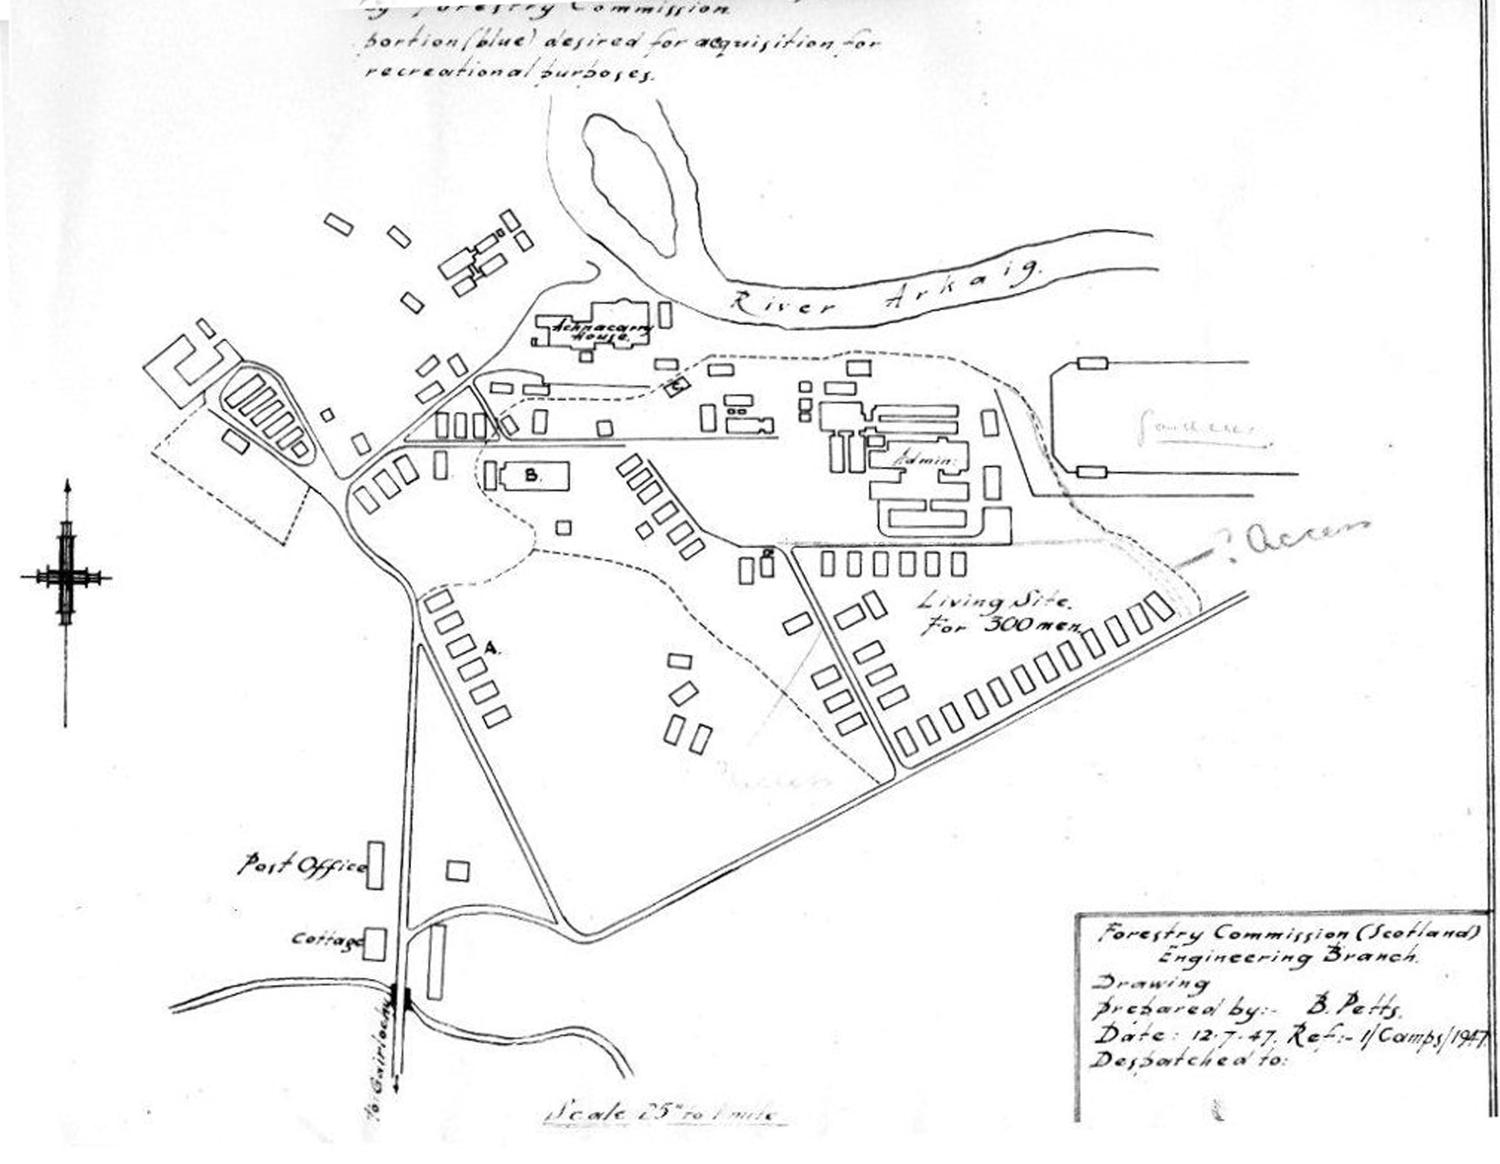 Map of the Achnacarry grounds 12th July 1947